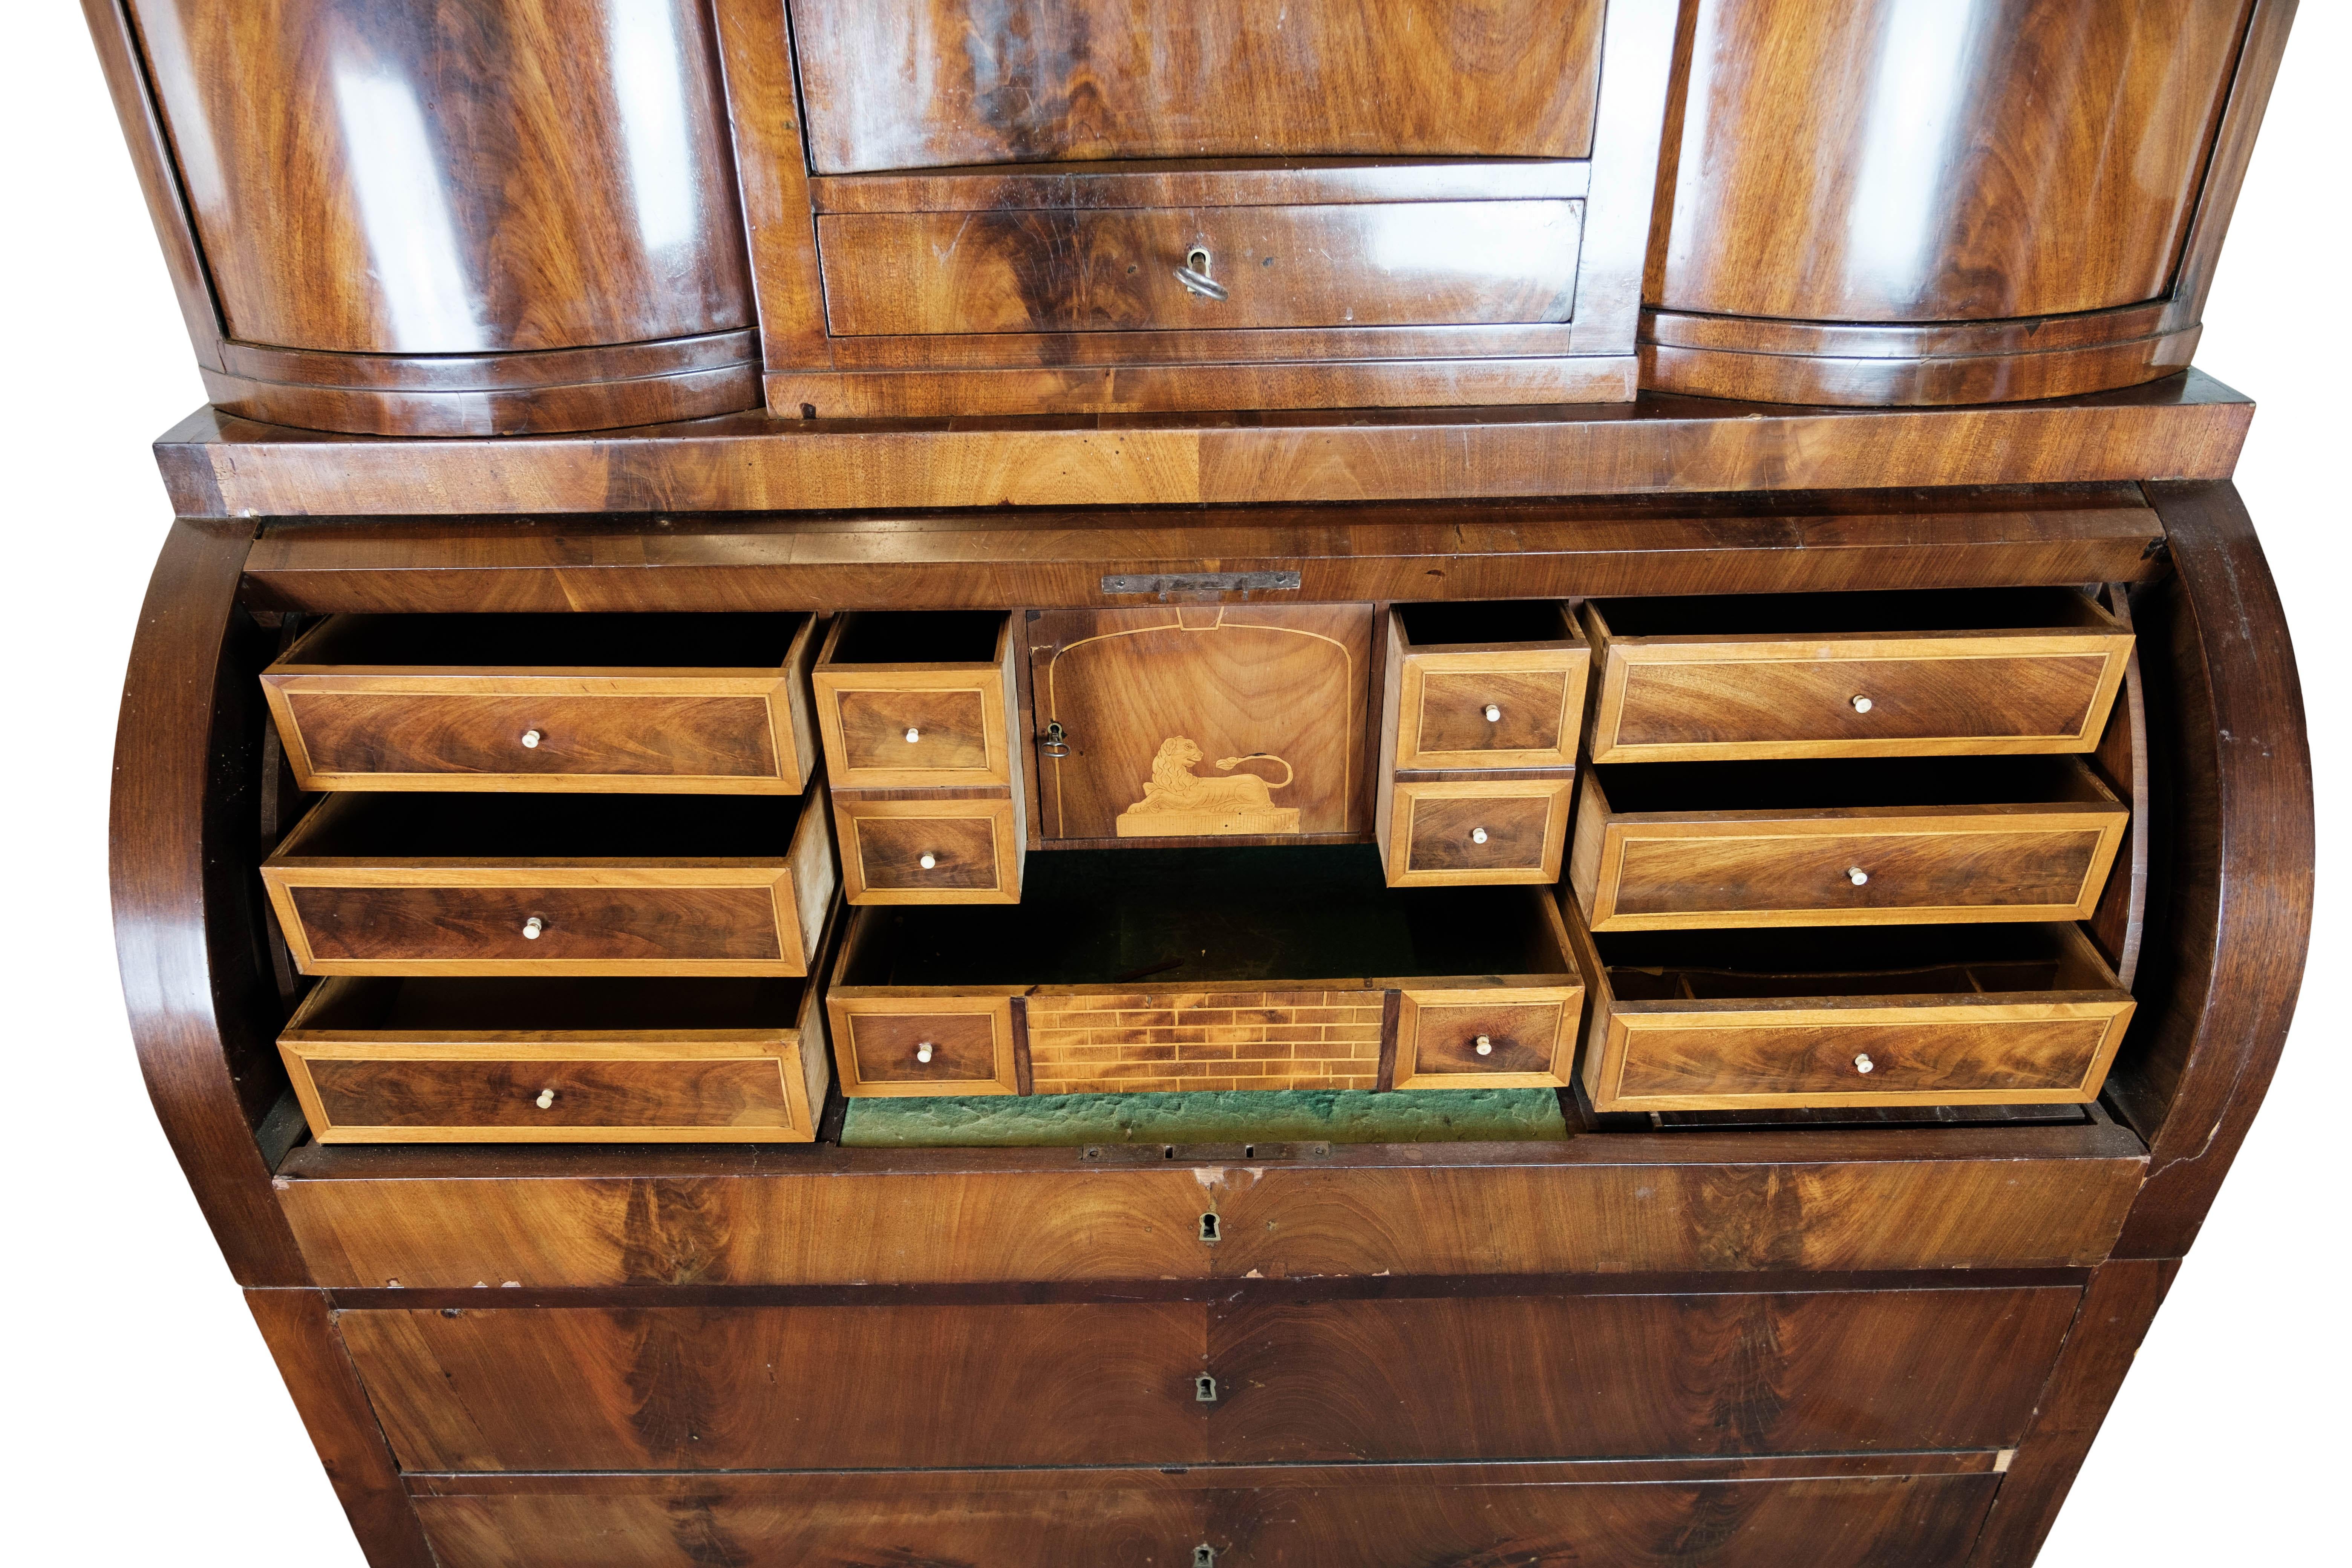 Inlay Large Empire Bureau of Hand Polished Mahogany with Inlaid Wood, 1820s For Sale